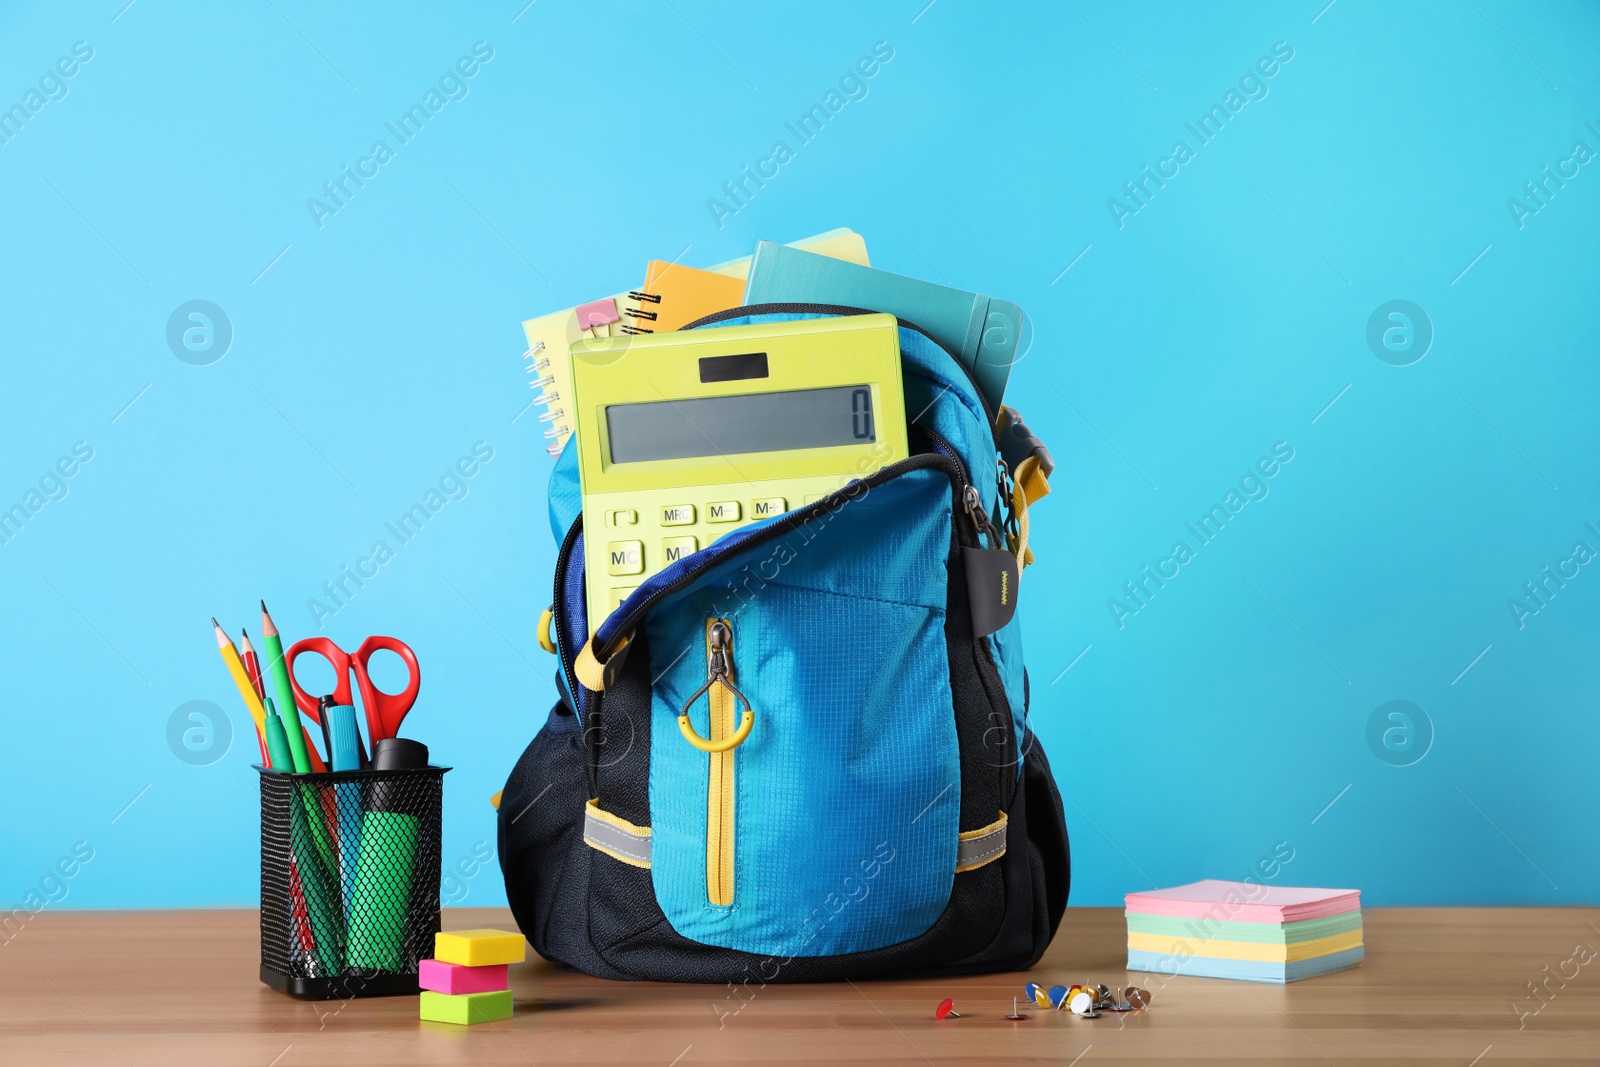 Photo of Backpack and different school stationery on wooden table against light blue background